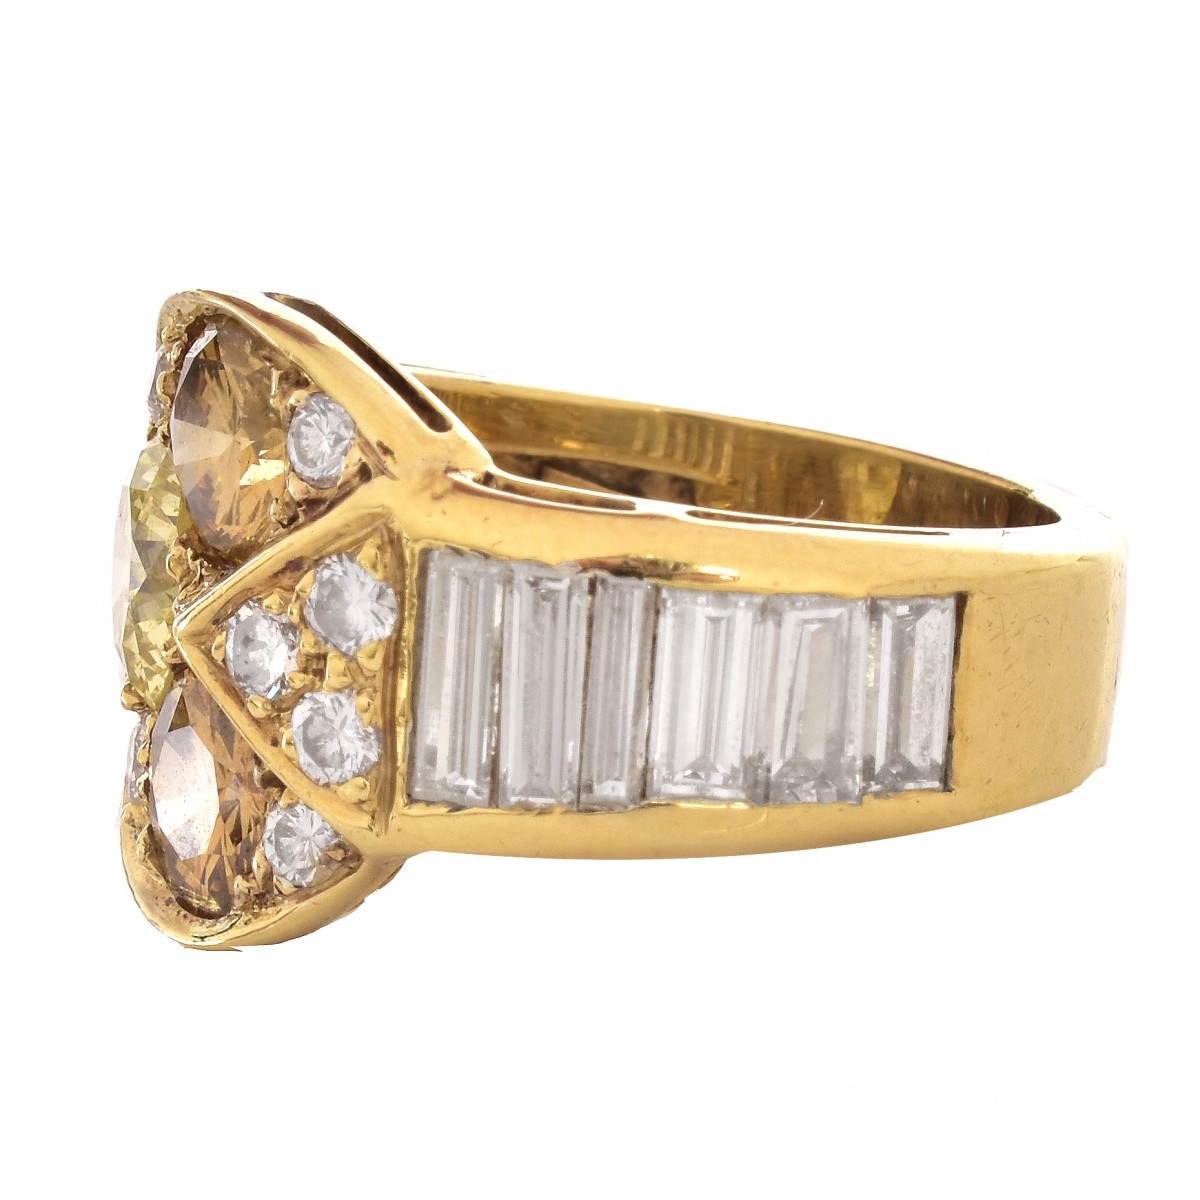 Moba 3.22ct TW Diamond and 18K Gold Ring